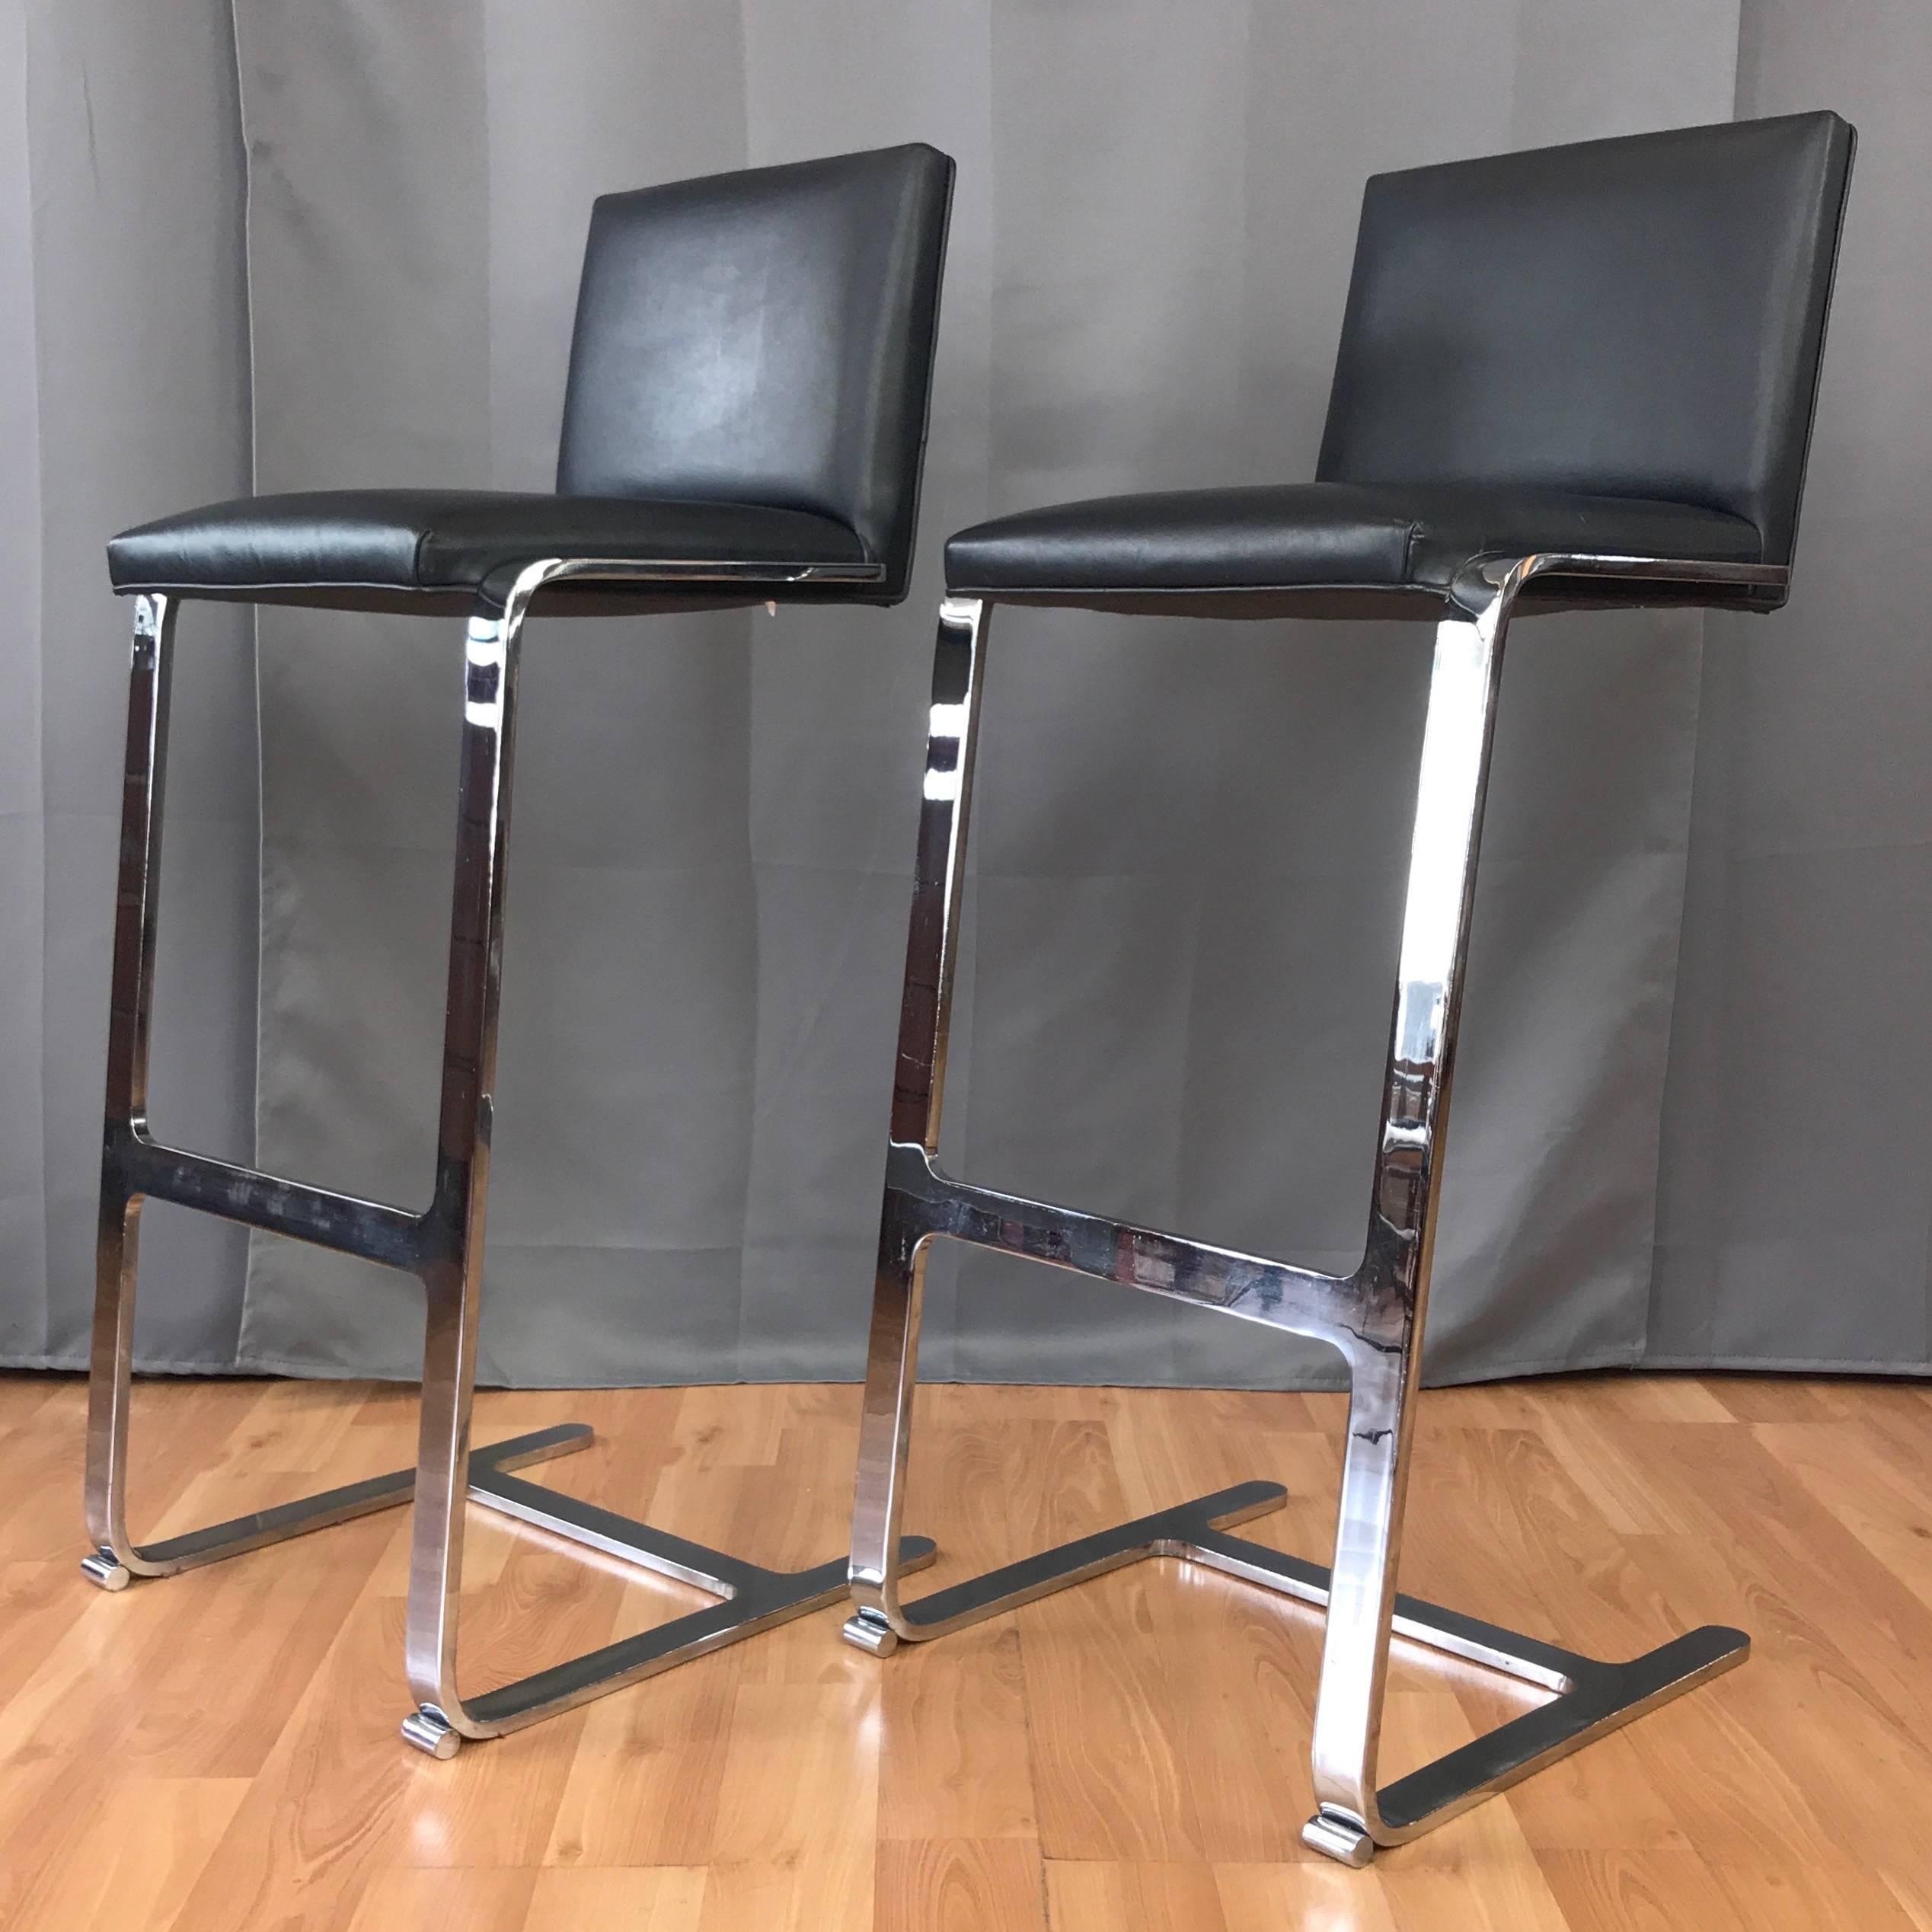 A late-1980s pair of Ludwig Mies van der Rohe-inspired minimalist chrome and leather 503 MV barstools by Gordon International.

Perfectly echoes the cantilevered design of Mies van der Rohe’s iconic Brno chair, with a seamless mirror finish chrome